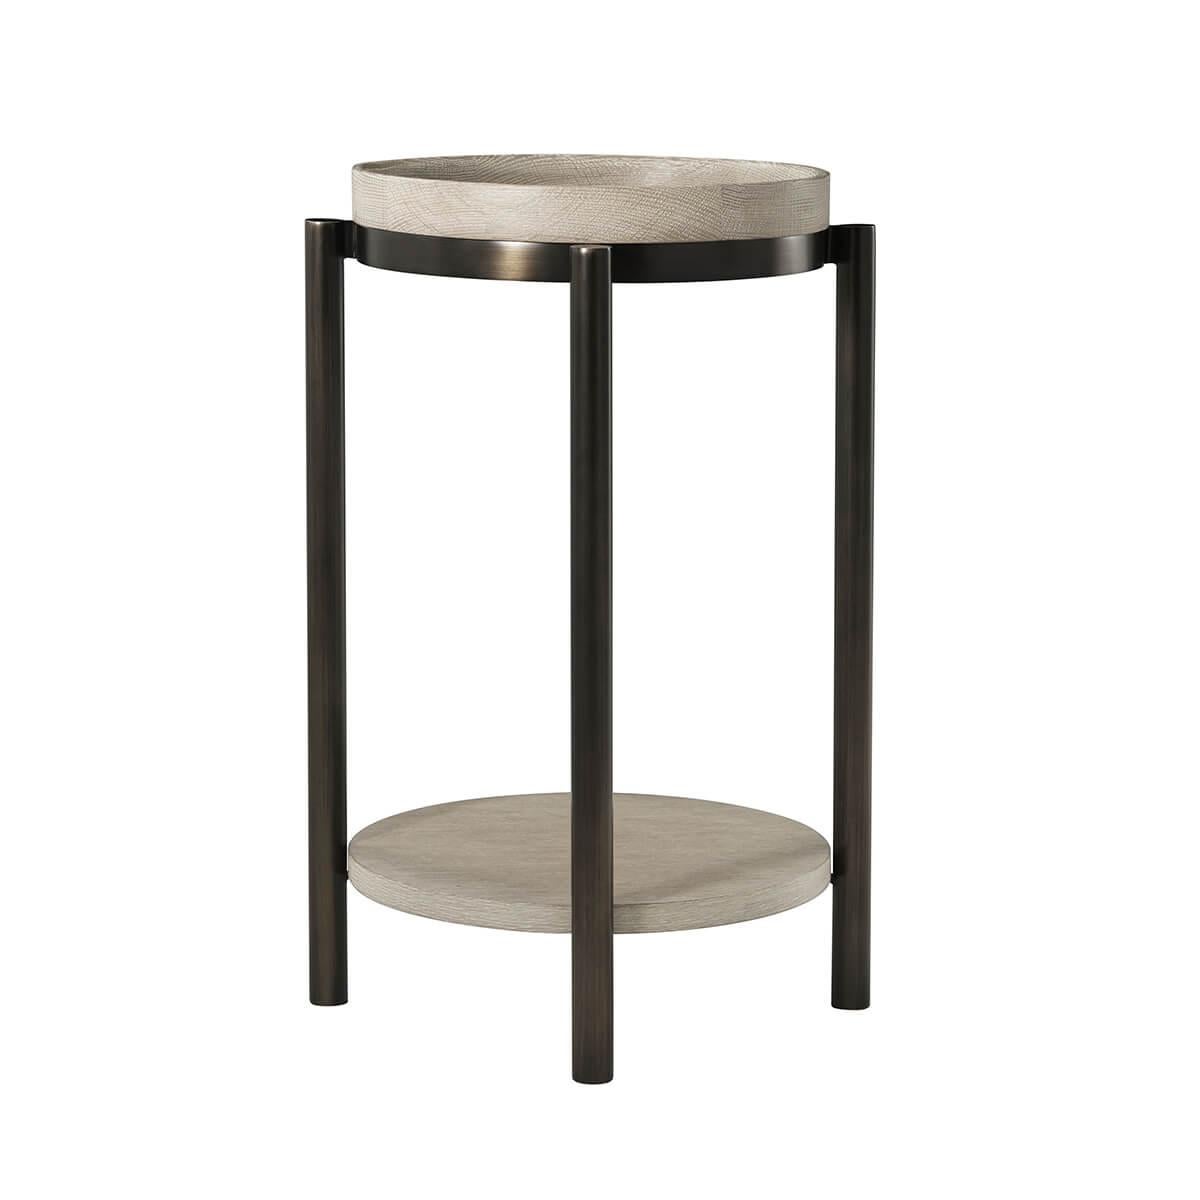 Vietnamese Modern Round Accent Table For Sale